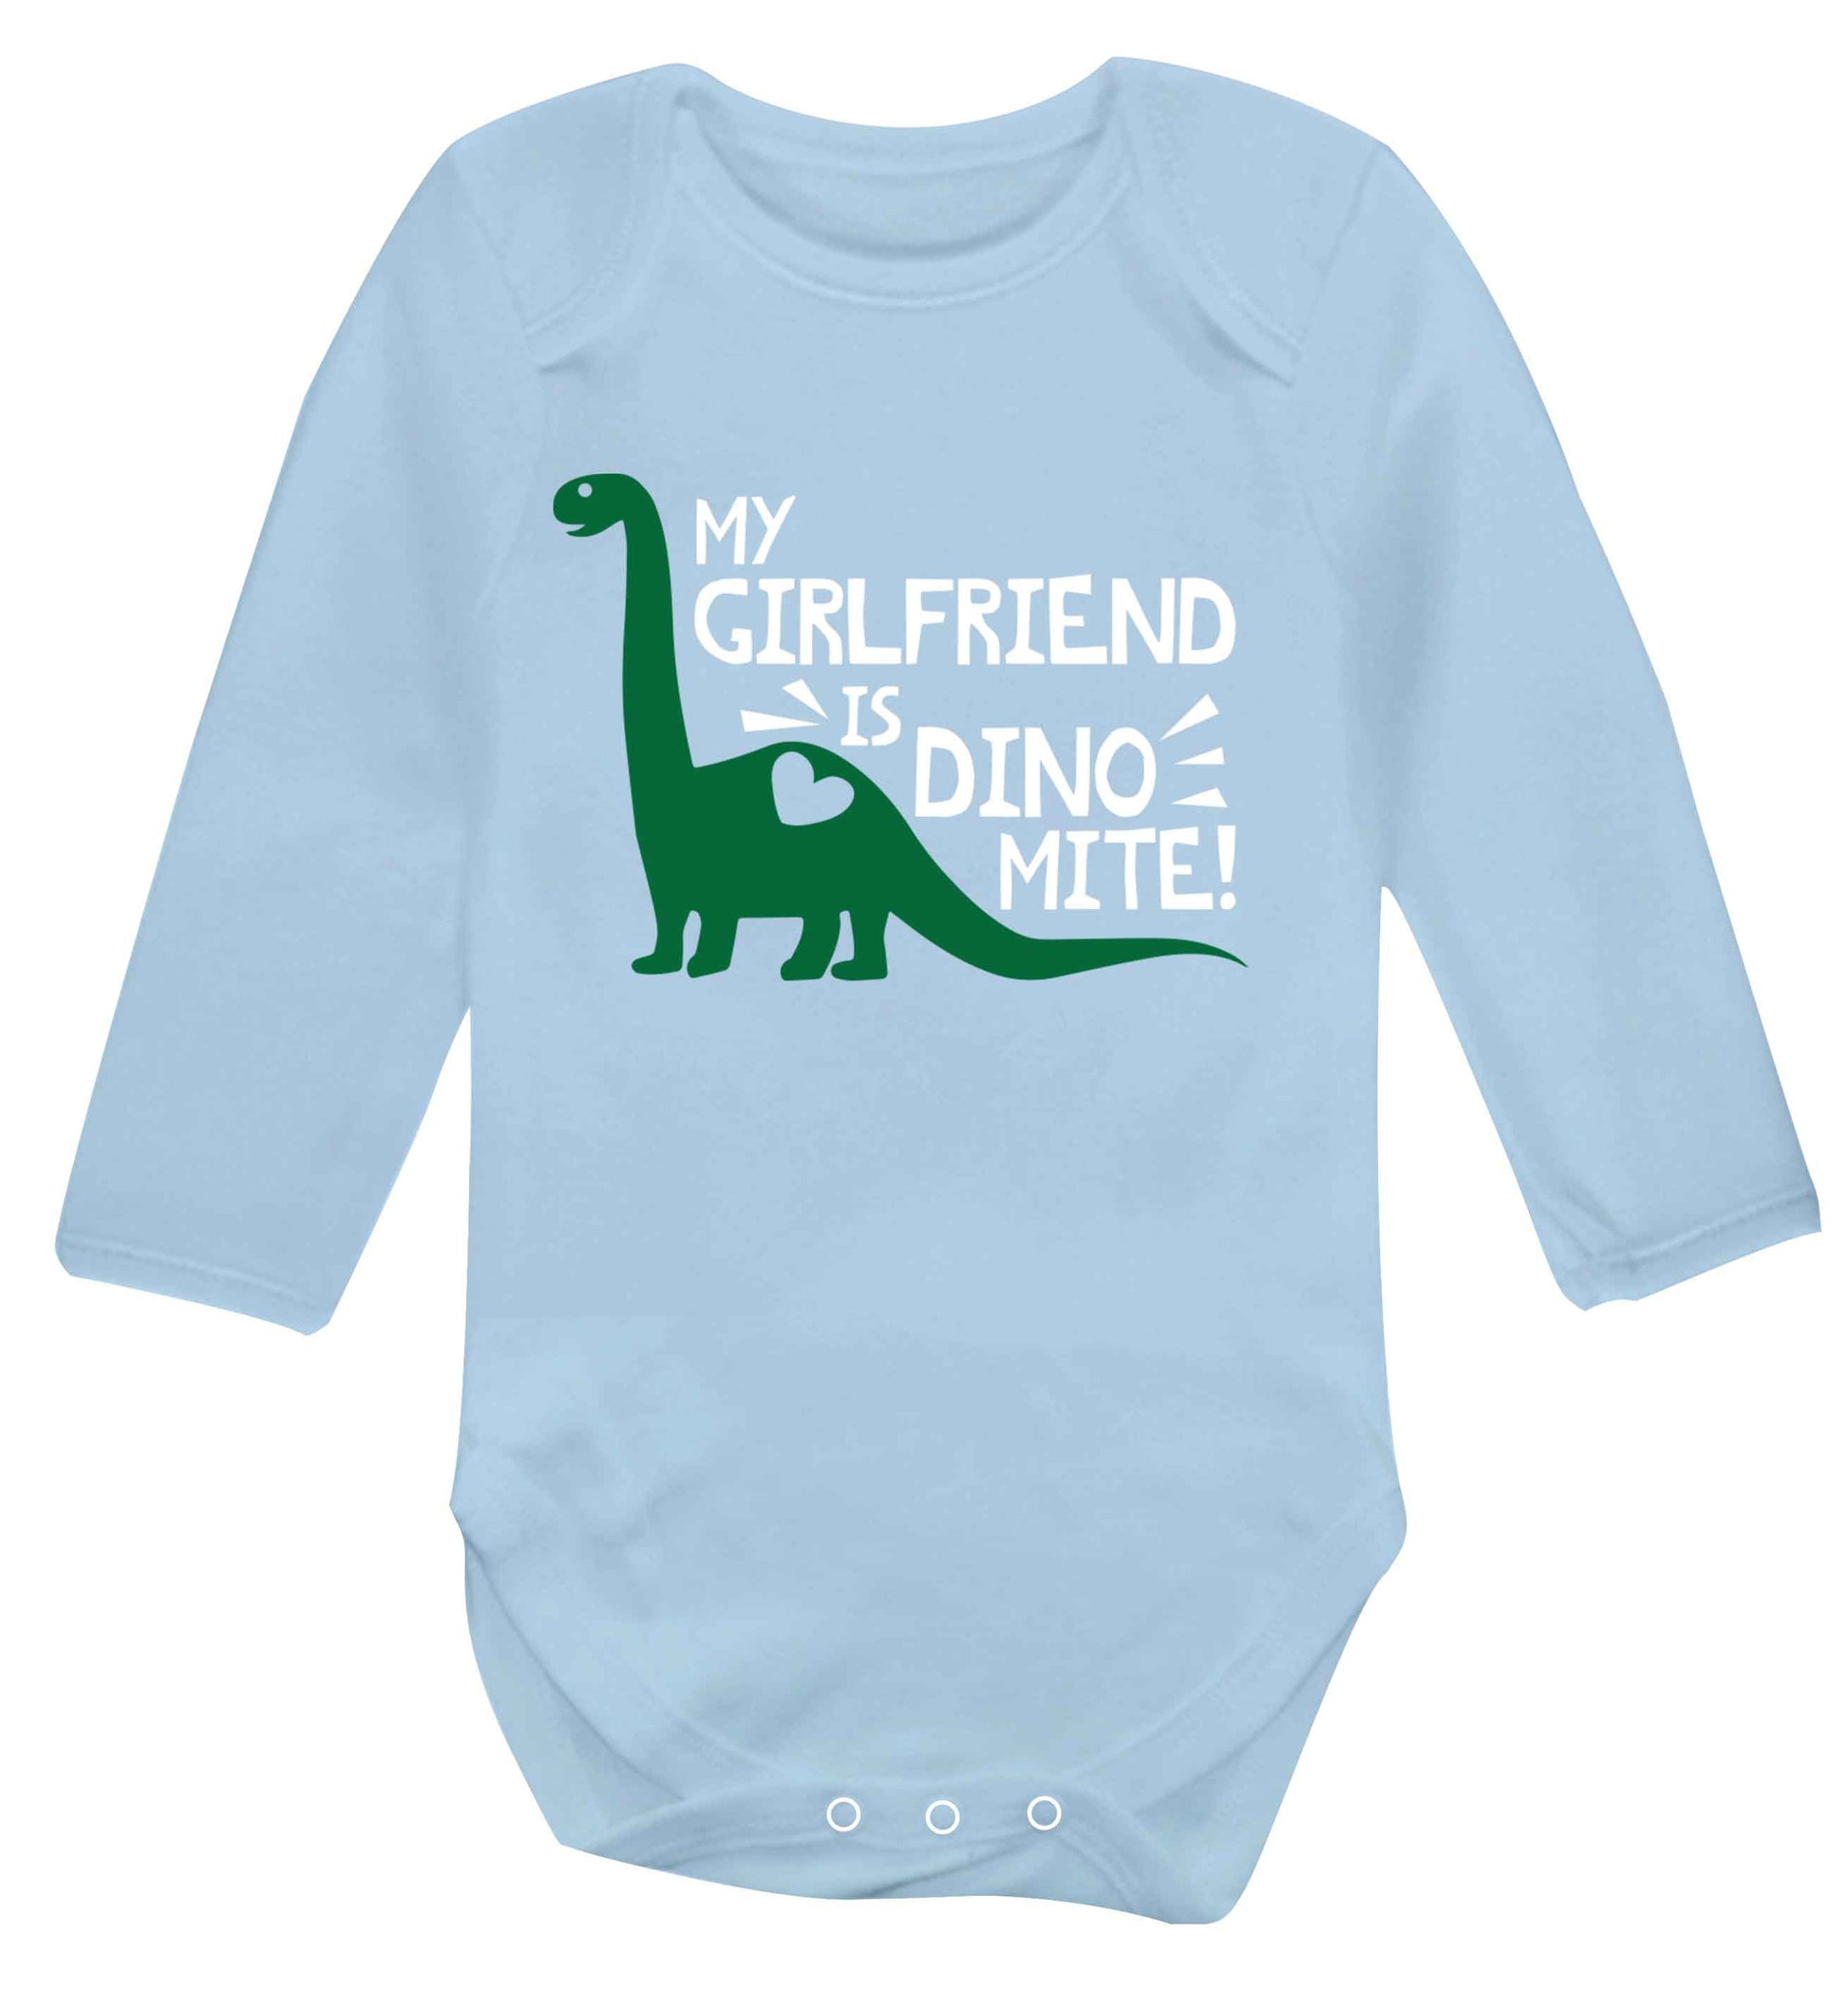 My girlfriend is dinomite! Baby Vest long sleeved pale blue 6-12 months